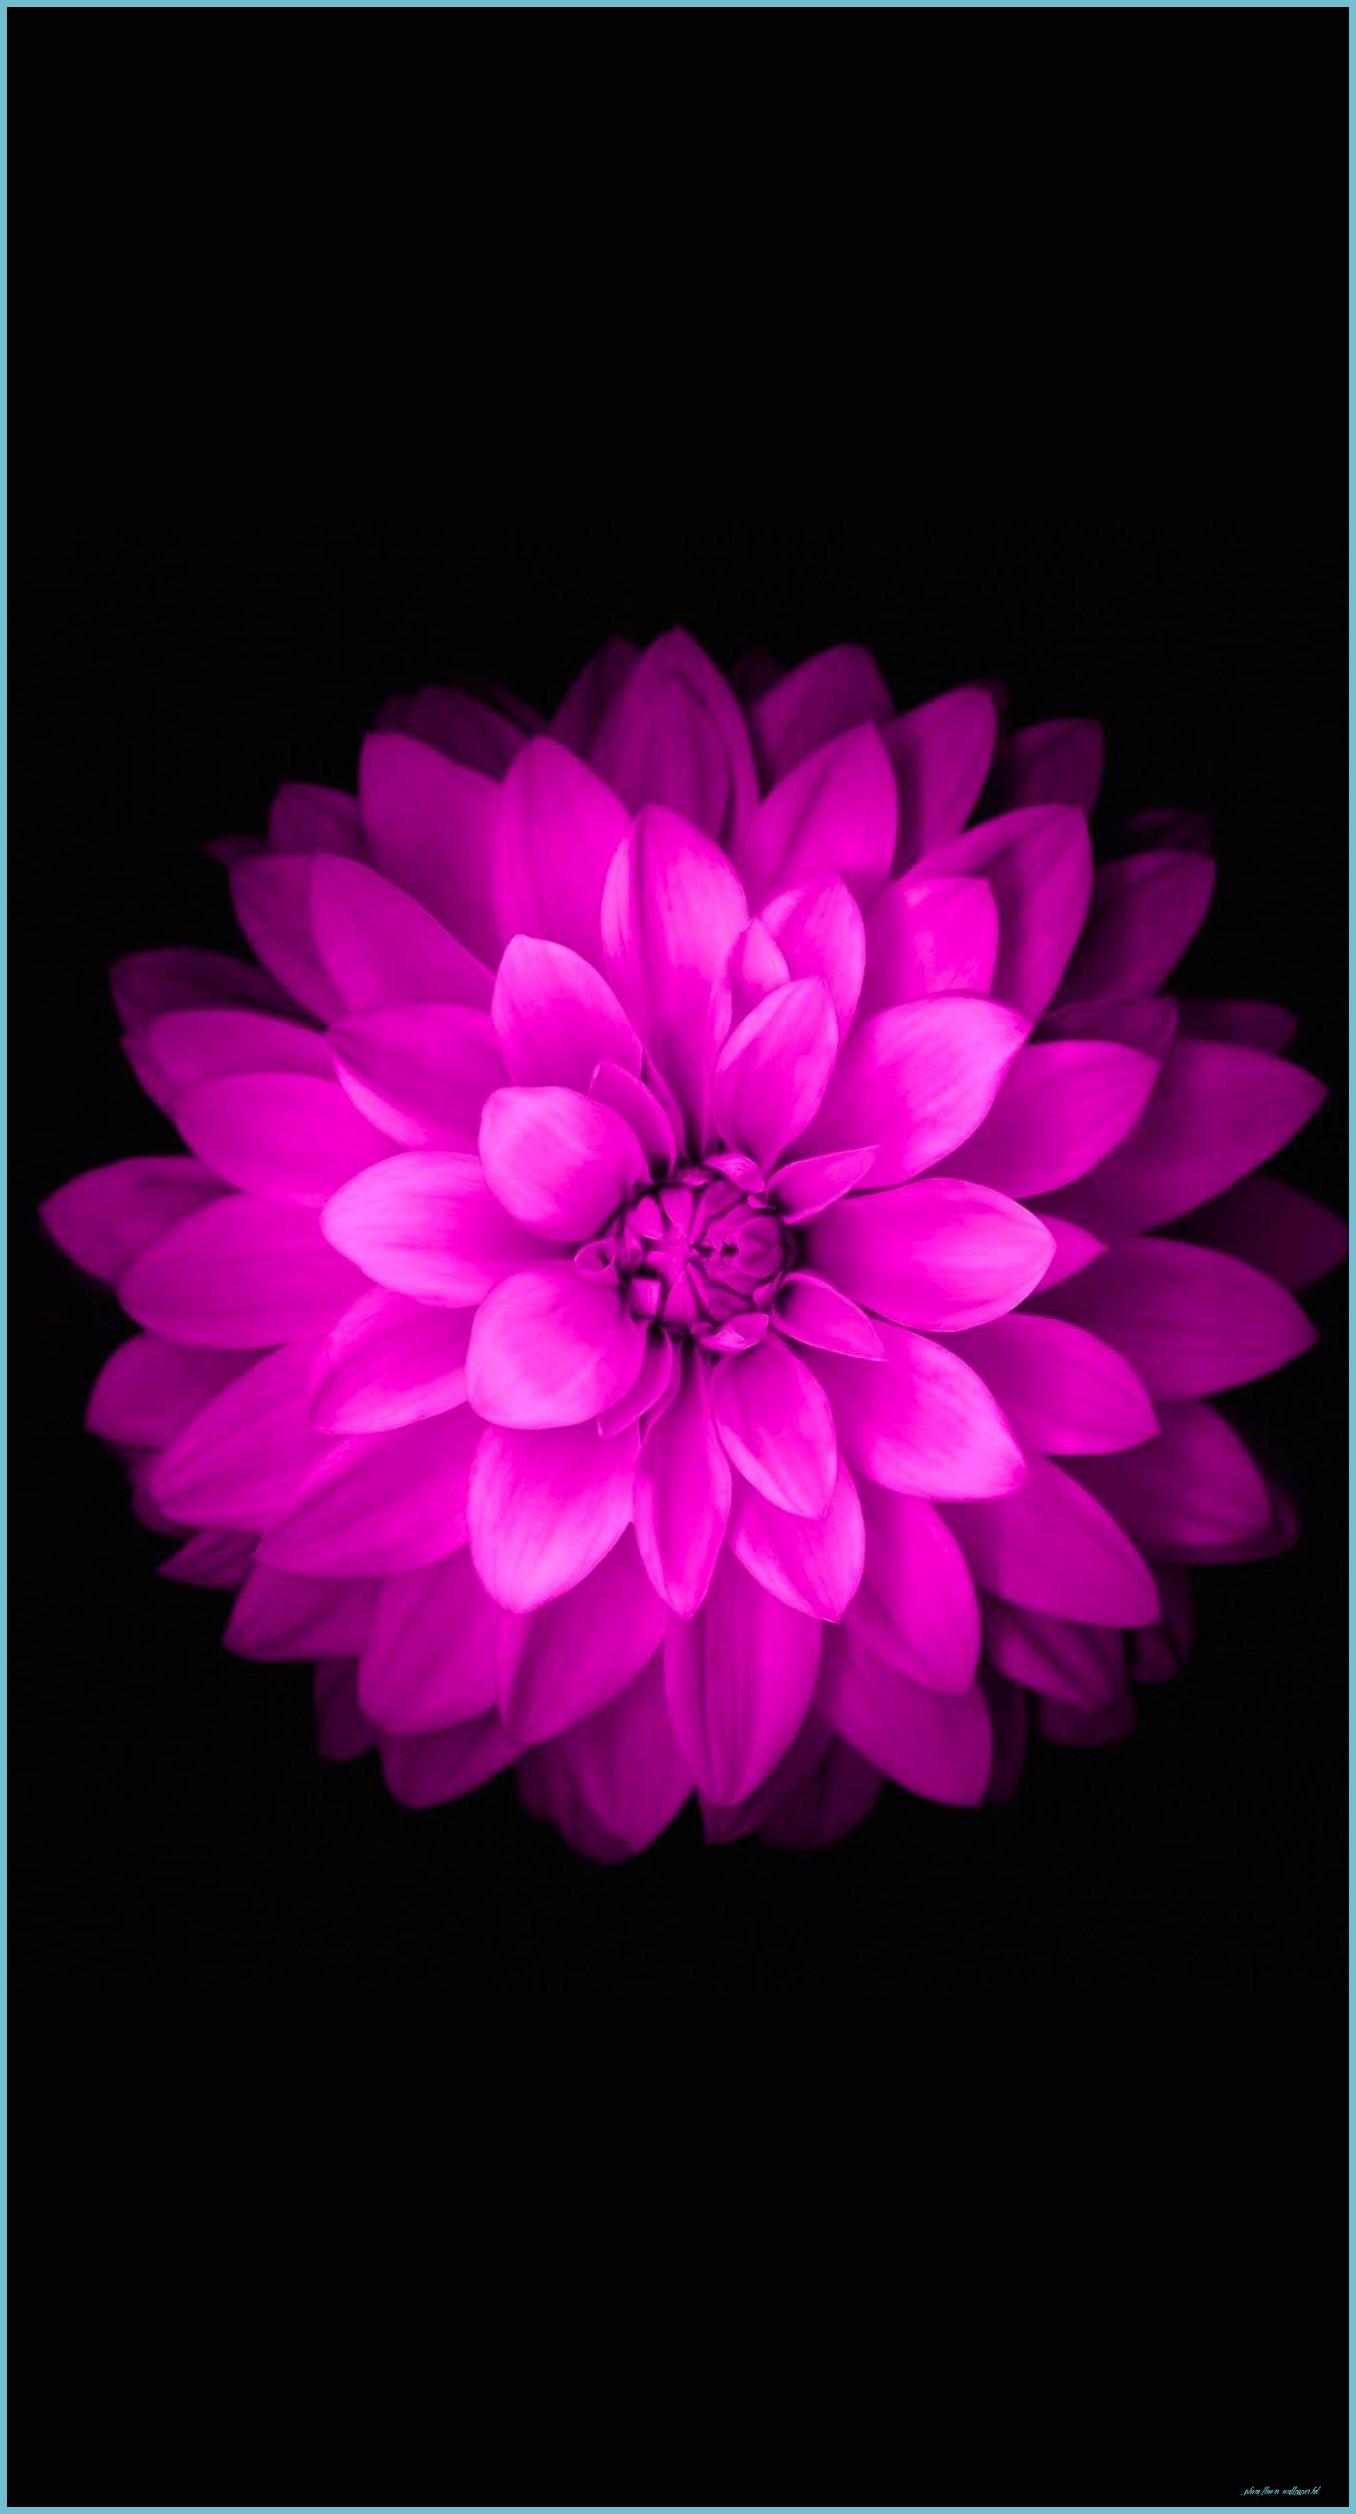 AMOLED Flower Wallpapers - Top Free AMOLED Flower Backgrounds ...